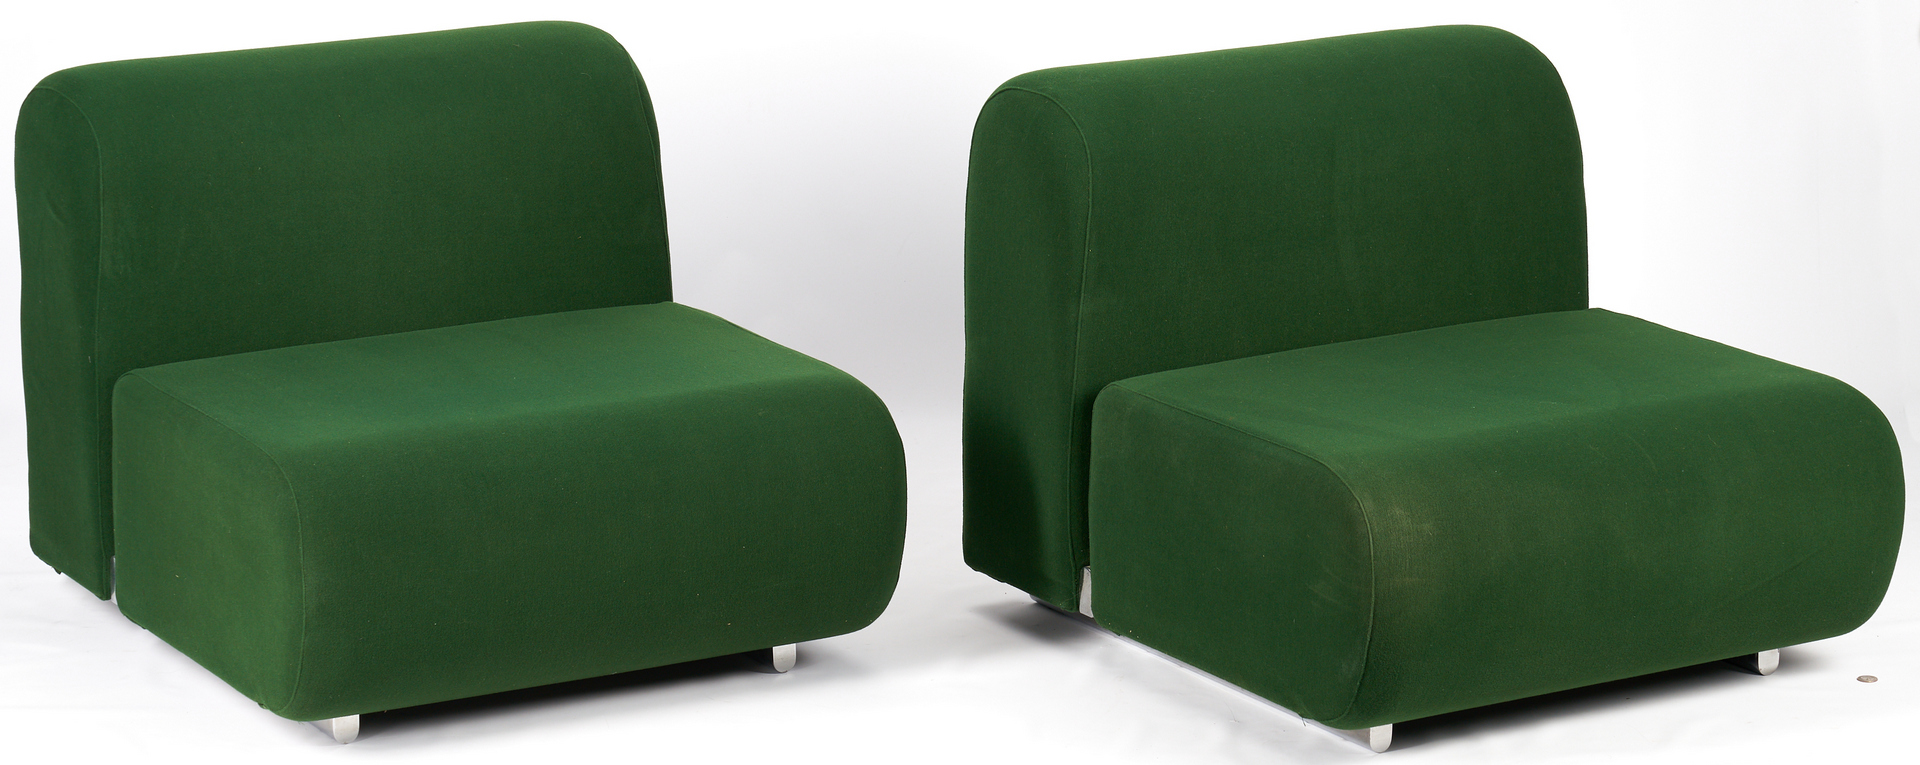 Lot 550: Pair of Labeled Knoll Chairs by Kazuhide Takamaha